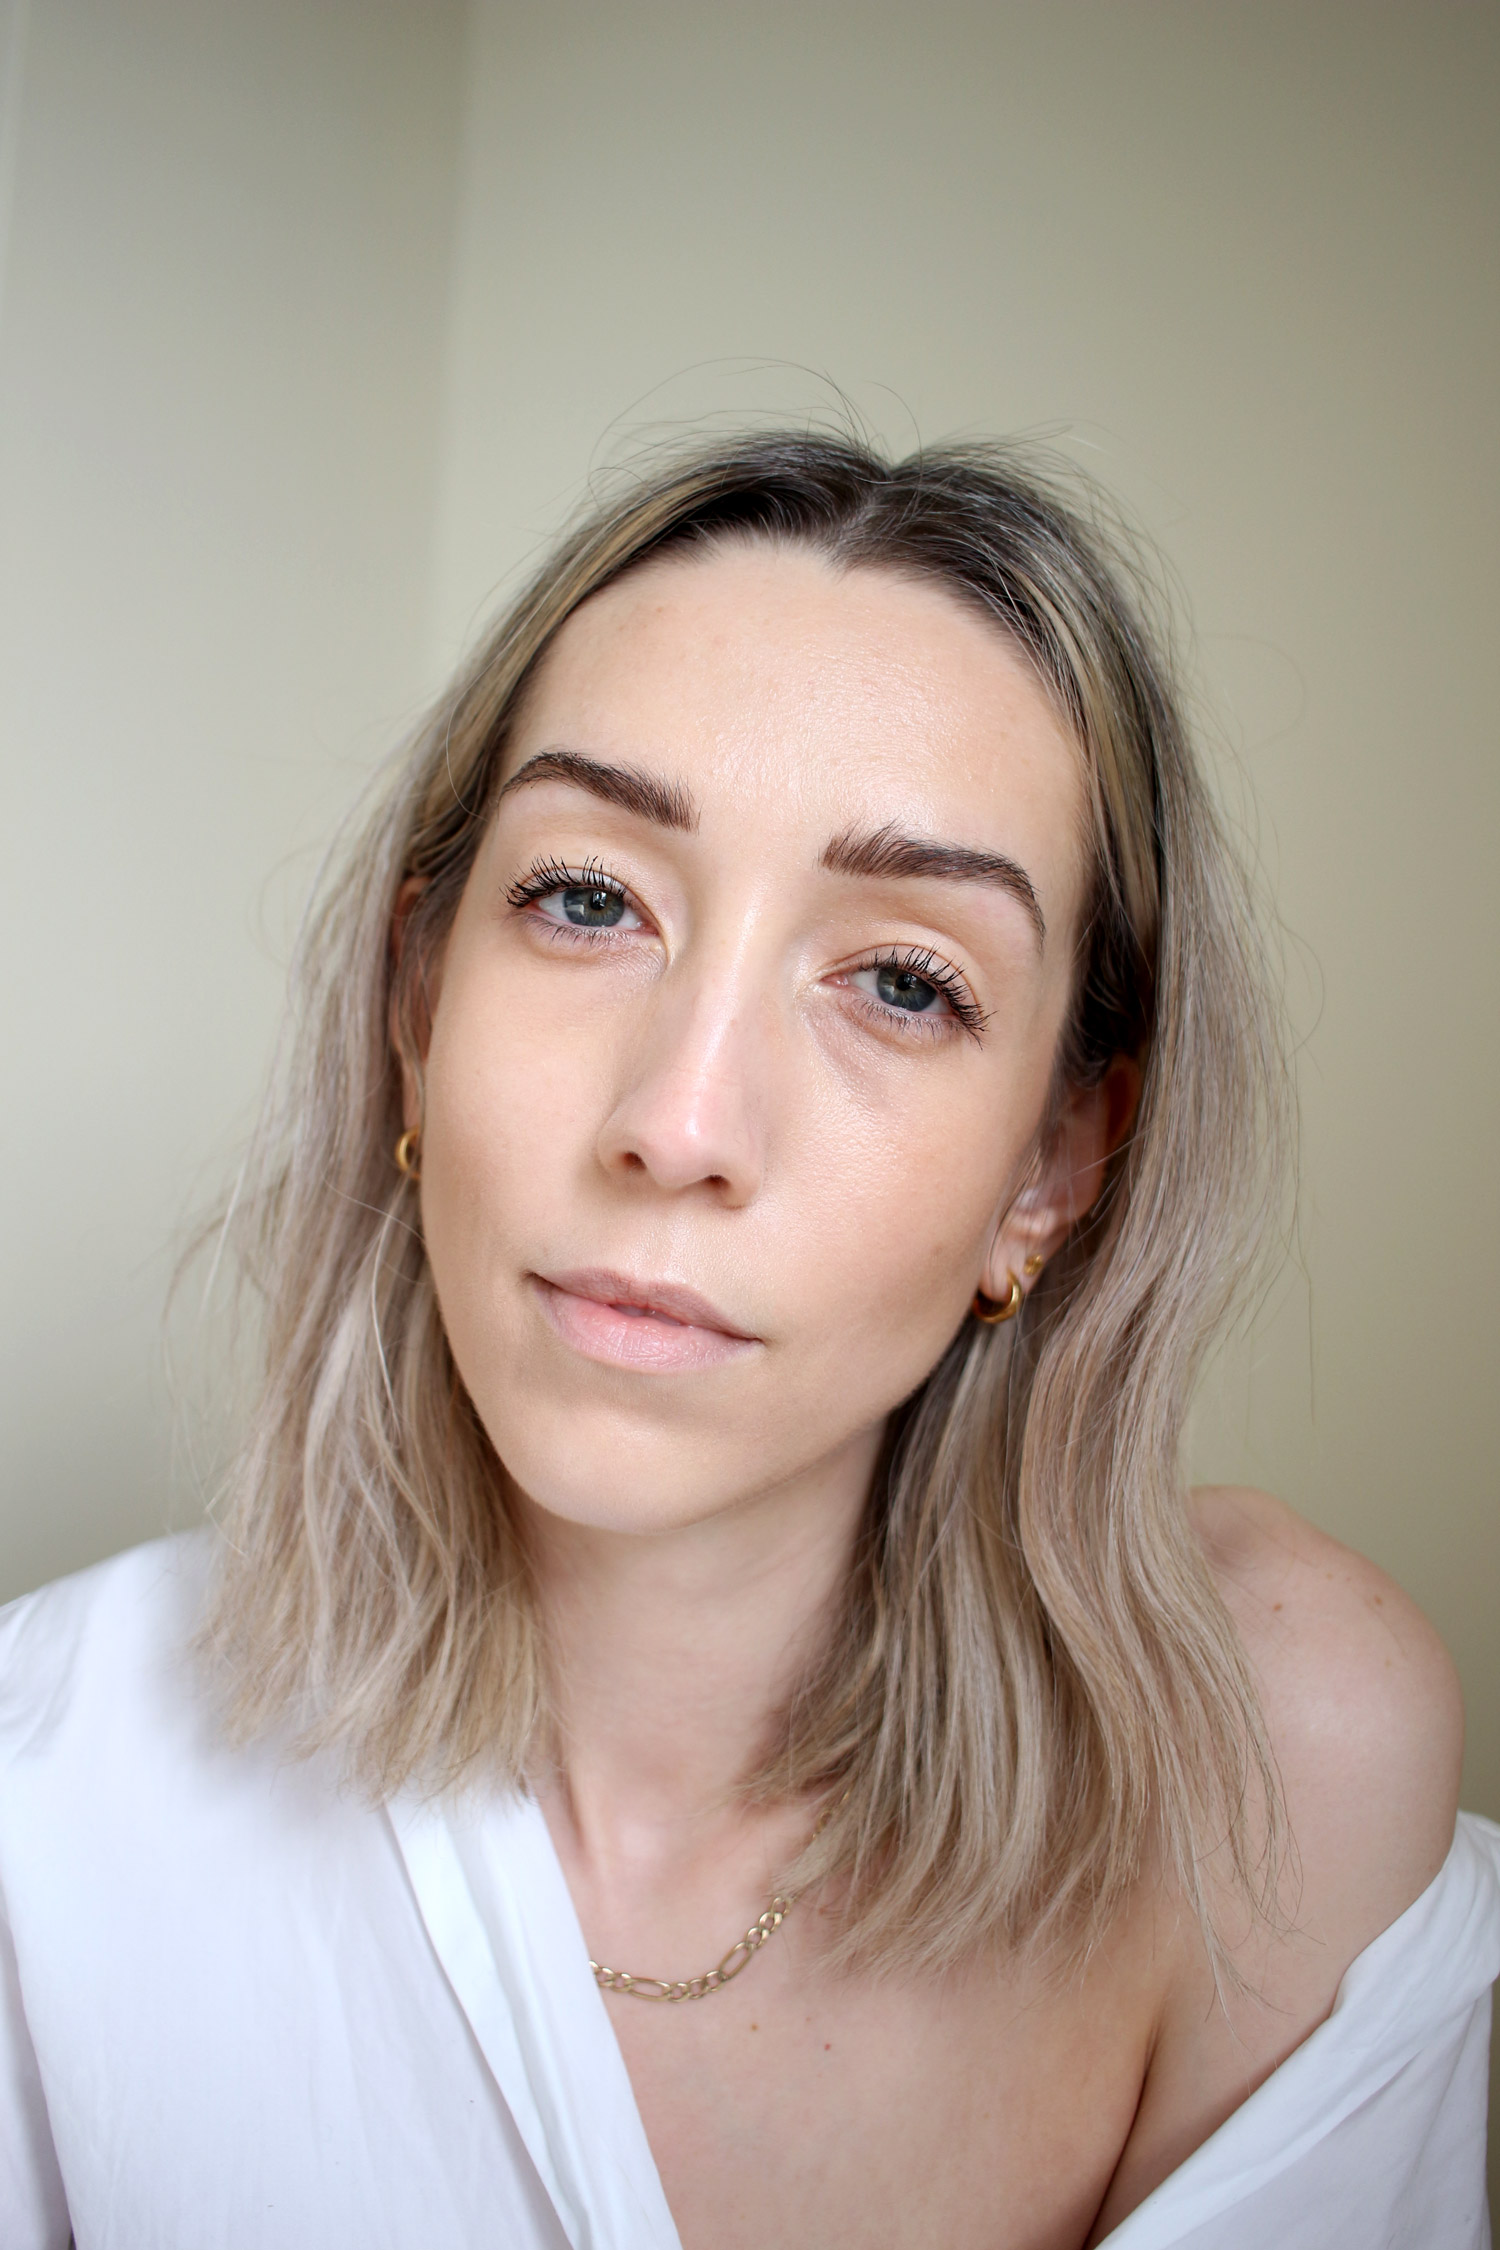 shiseido-synchro-skin-self-refreshing-tint-and-concealer-review-5